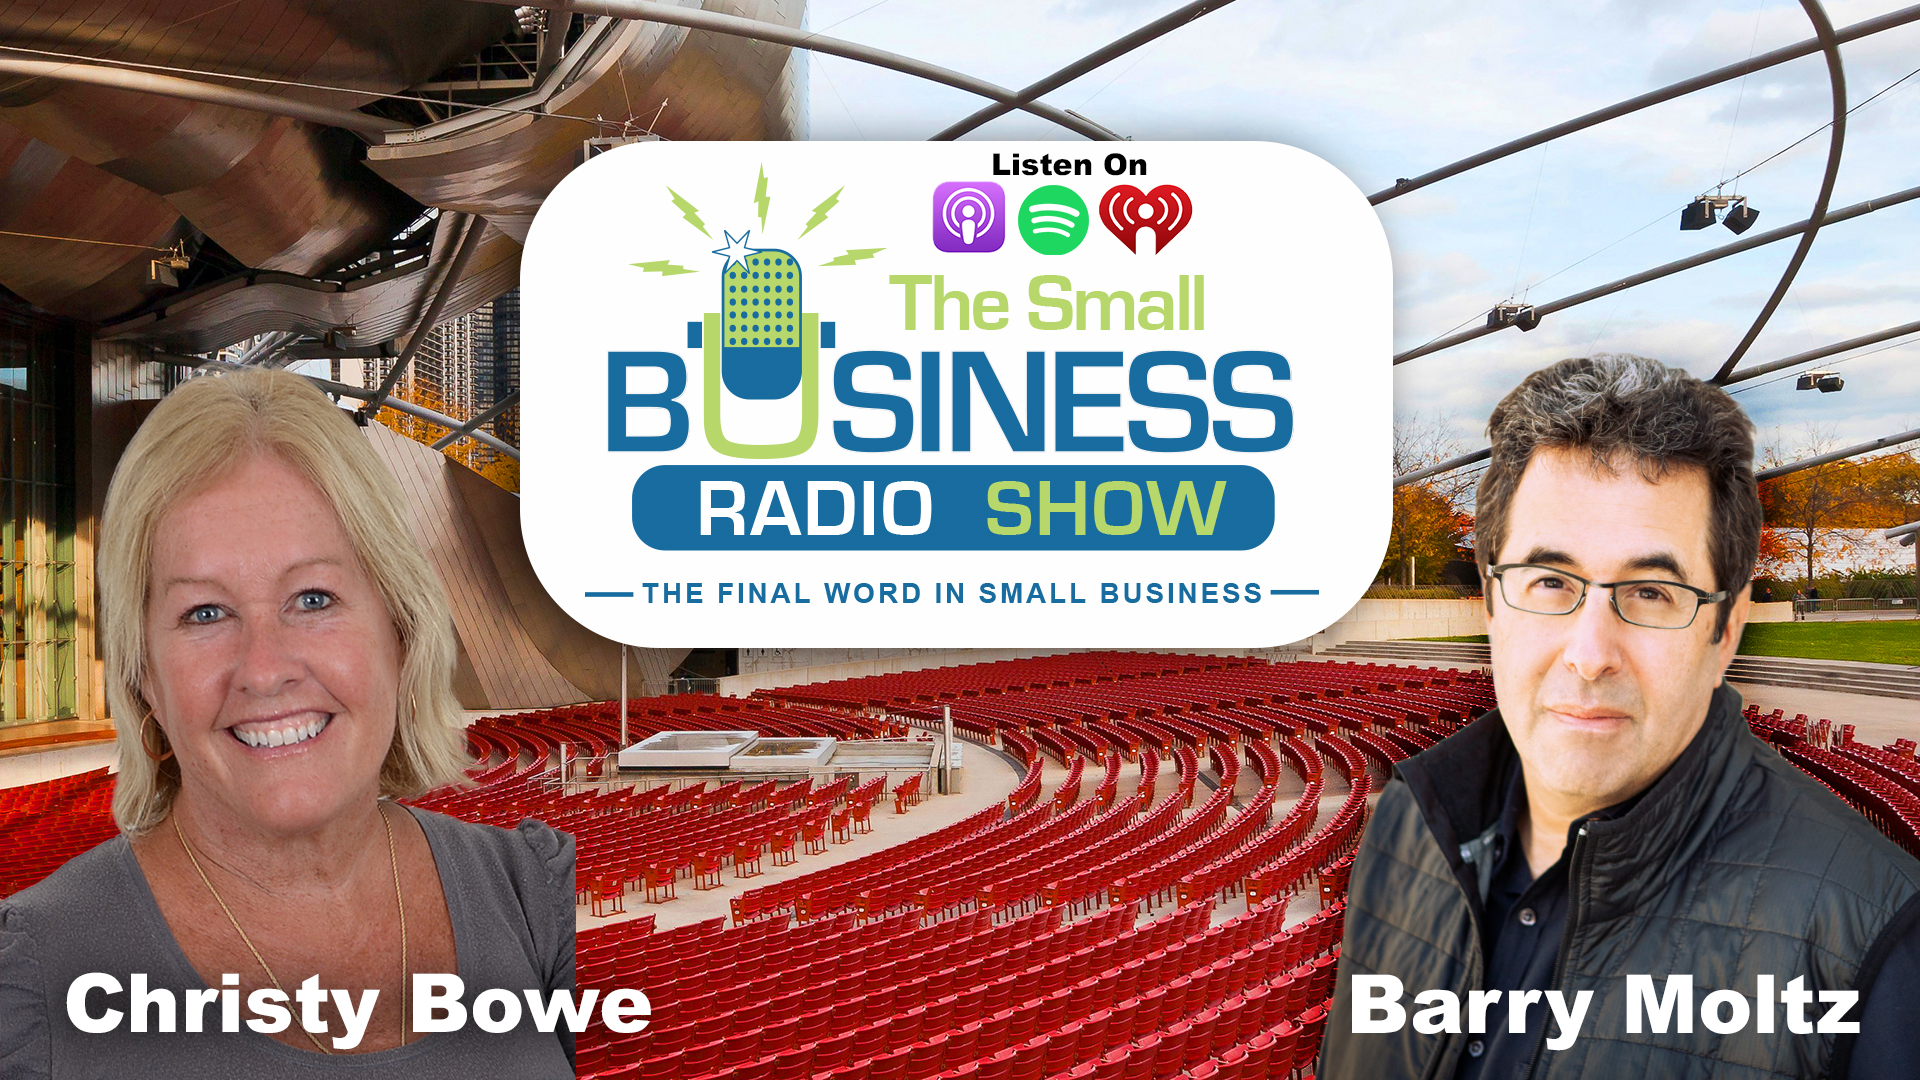 Christy Bowe on The Small Business Radio Show